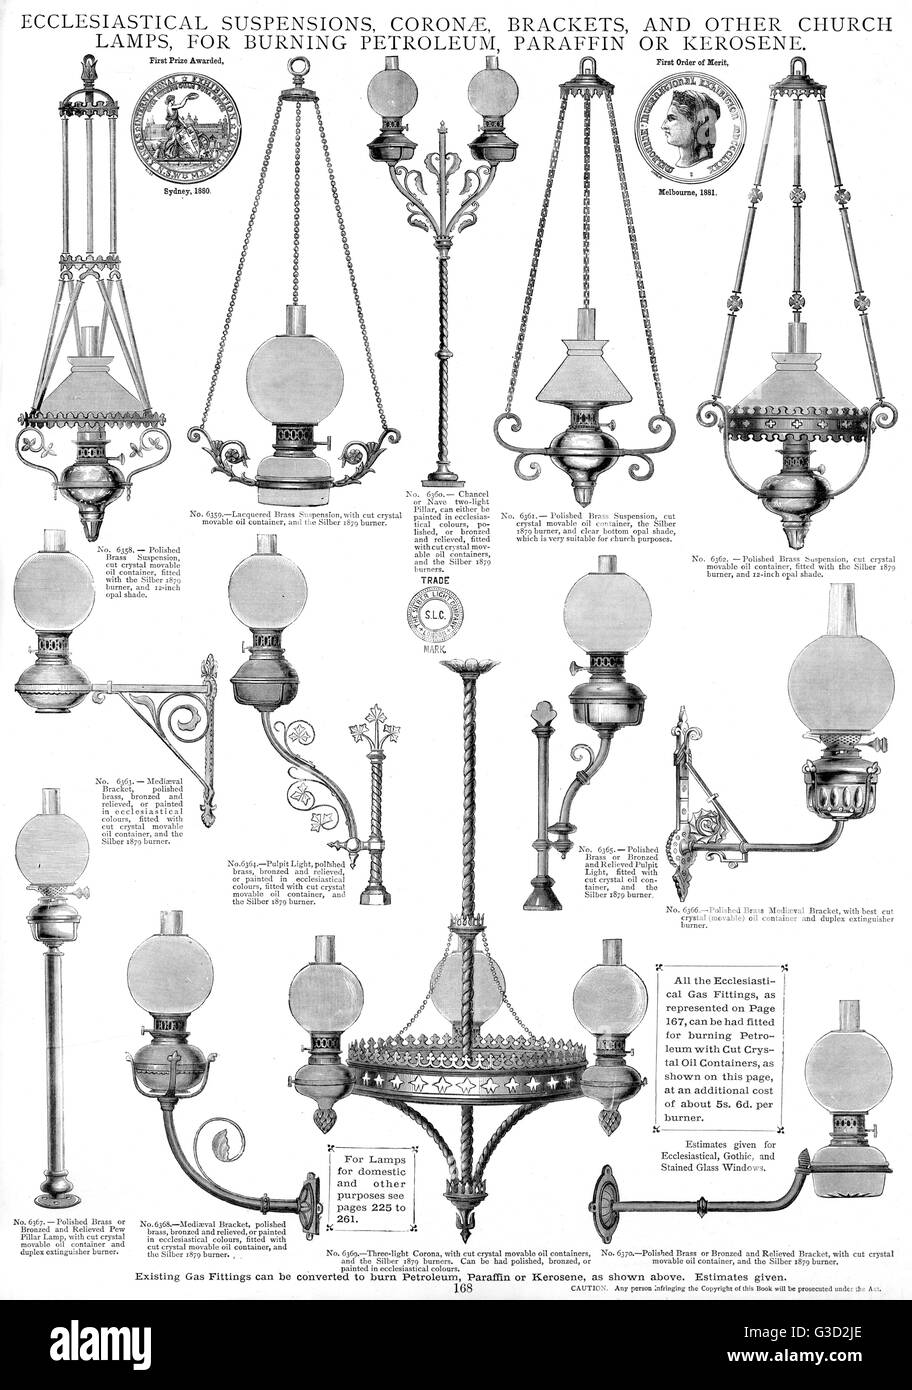 Ecclesiastical suspensions, coronae, brackets and other church lamps, for burning petroleum, paraffin or kerosene, Plate 168.       Date: circa 1880s Stock Photo